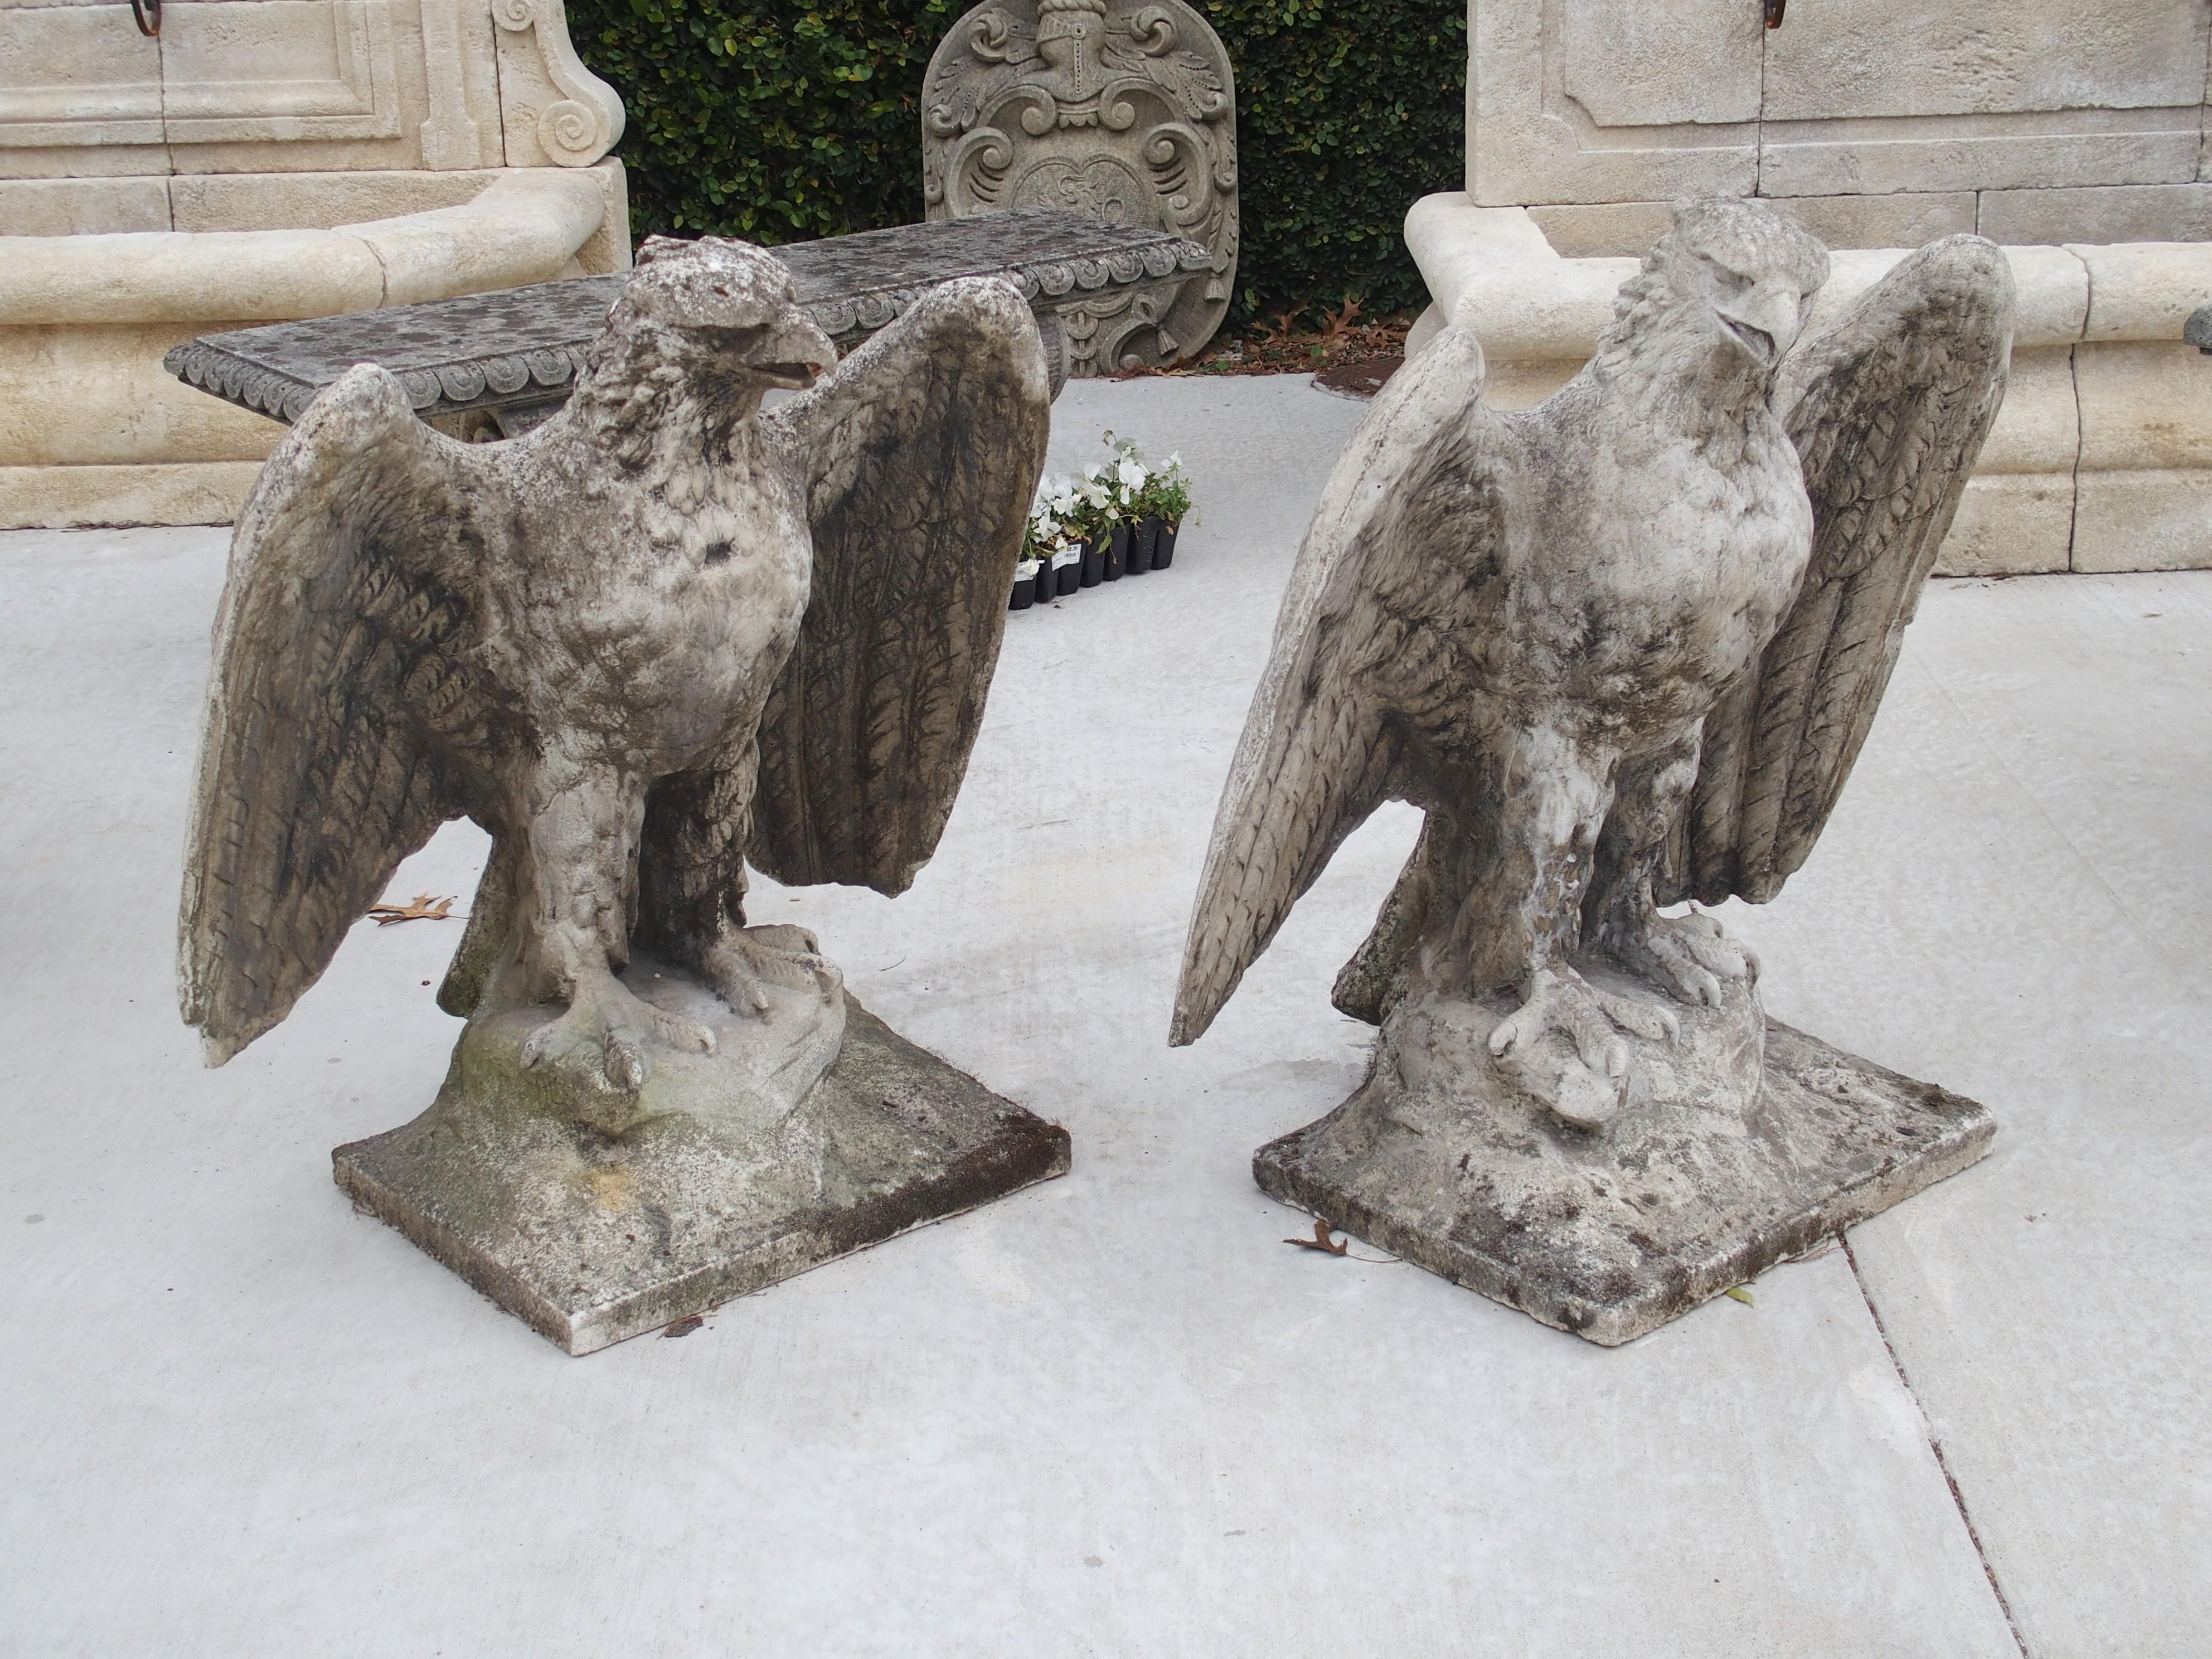 This large pair of cast stone eagles was recently salvaged from a property in England, and they were produced around the 1920’s. The pair is said to be opposing, as one bird is looking left, while the other is looking right. This would require two